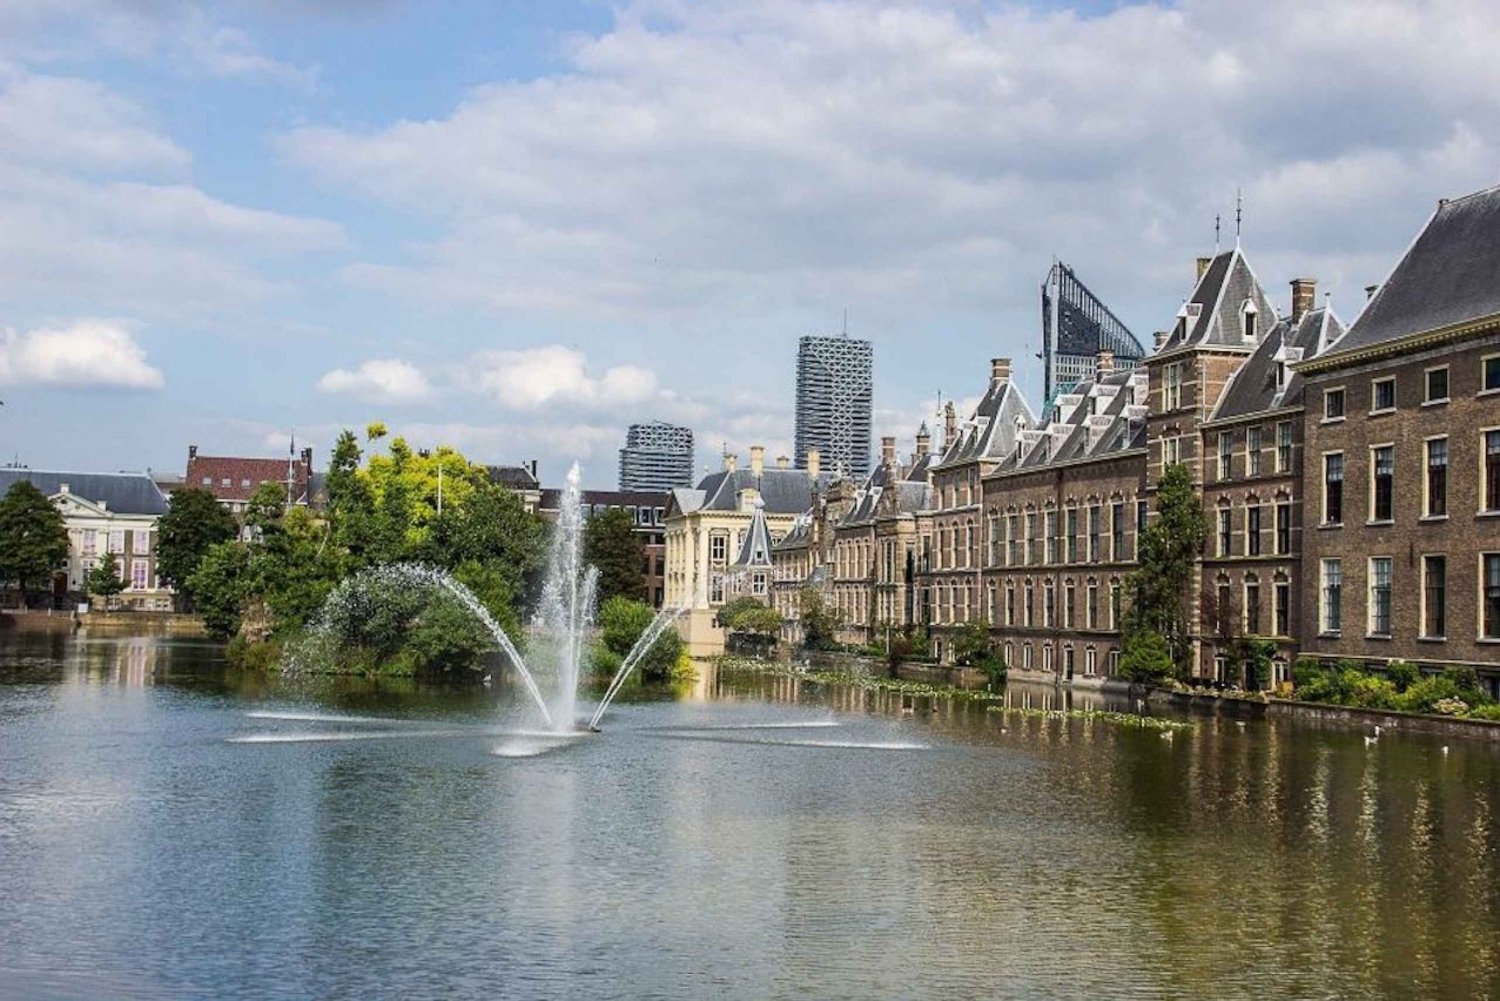 From Amsterdam: The Hague Private Trip and Mauritshuis Entry